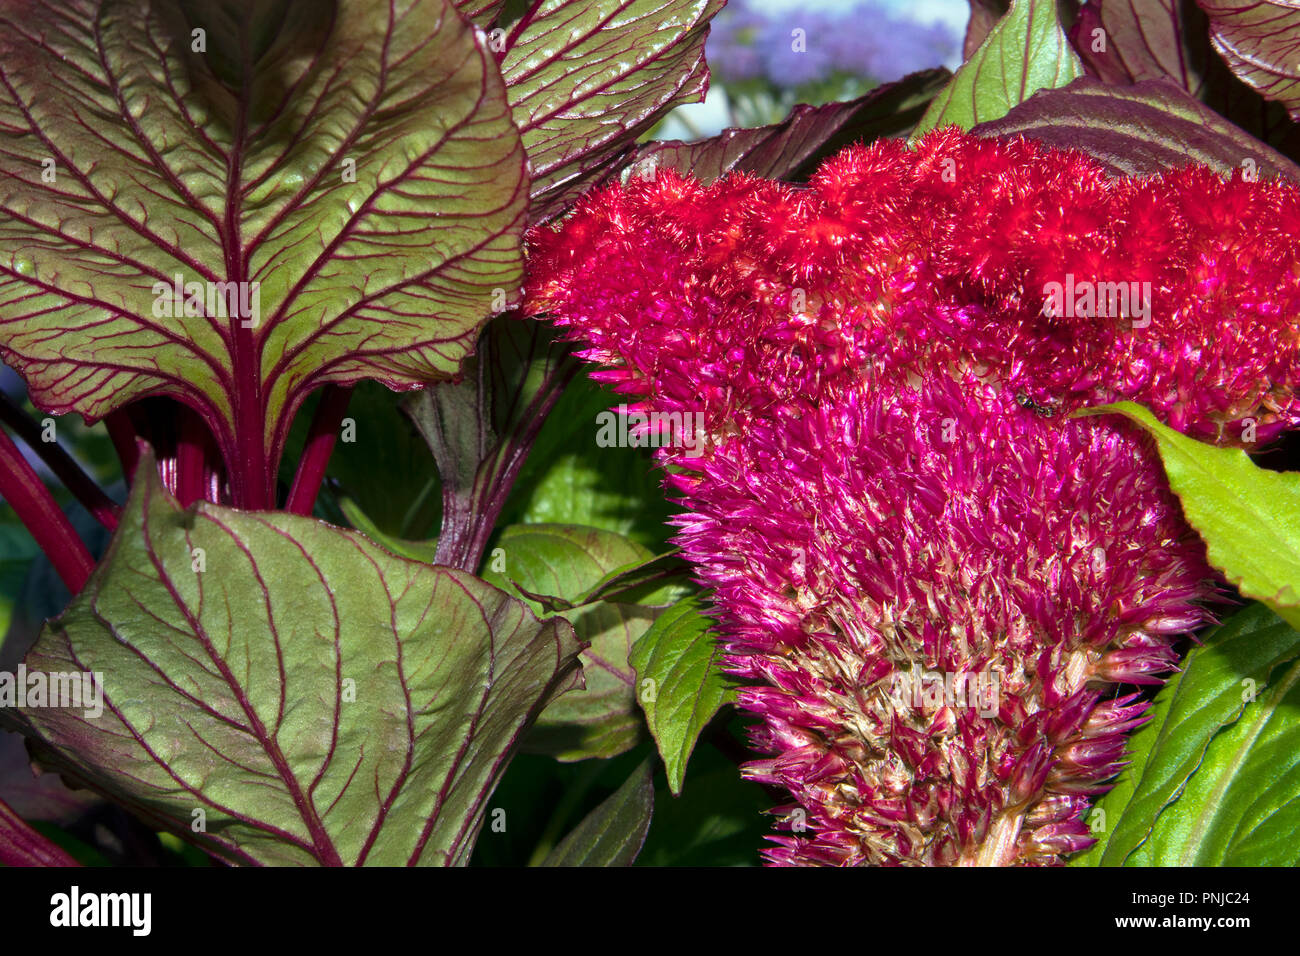 Beautiful flower of purple garden Celosia cristata against green leaves with burgundy streaks Stock Photo